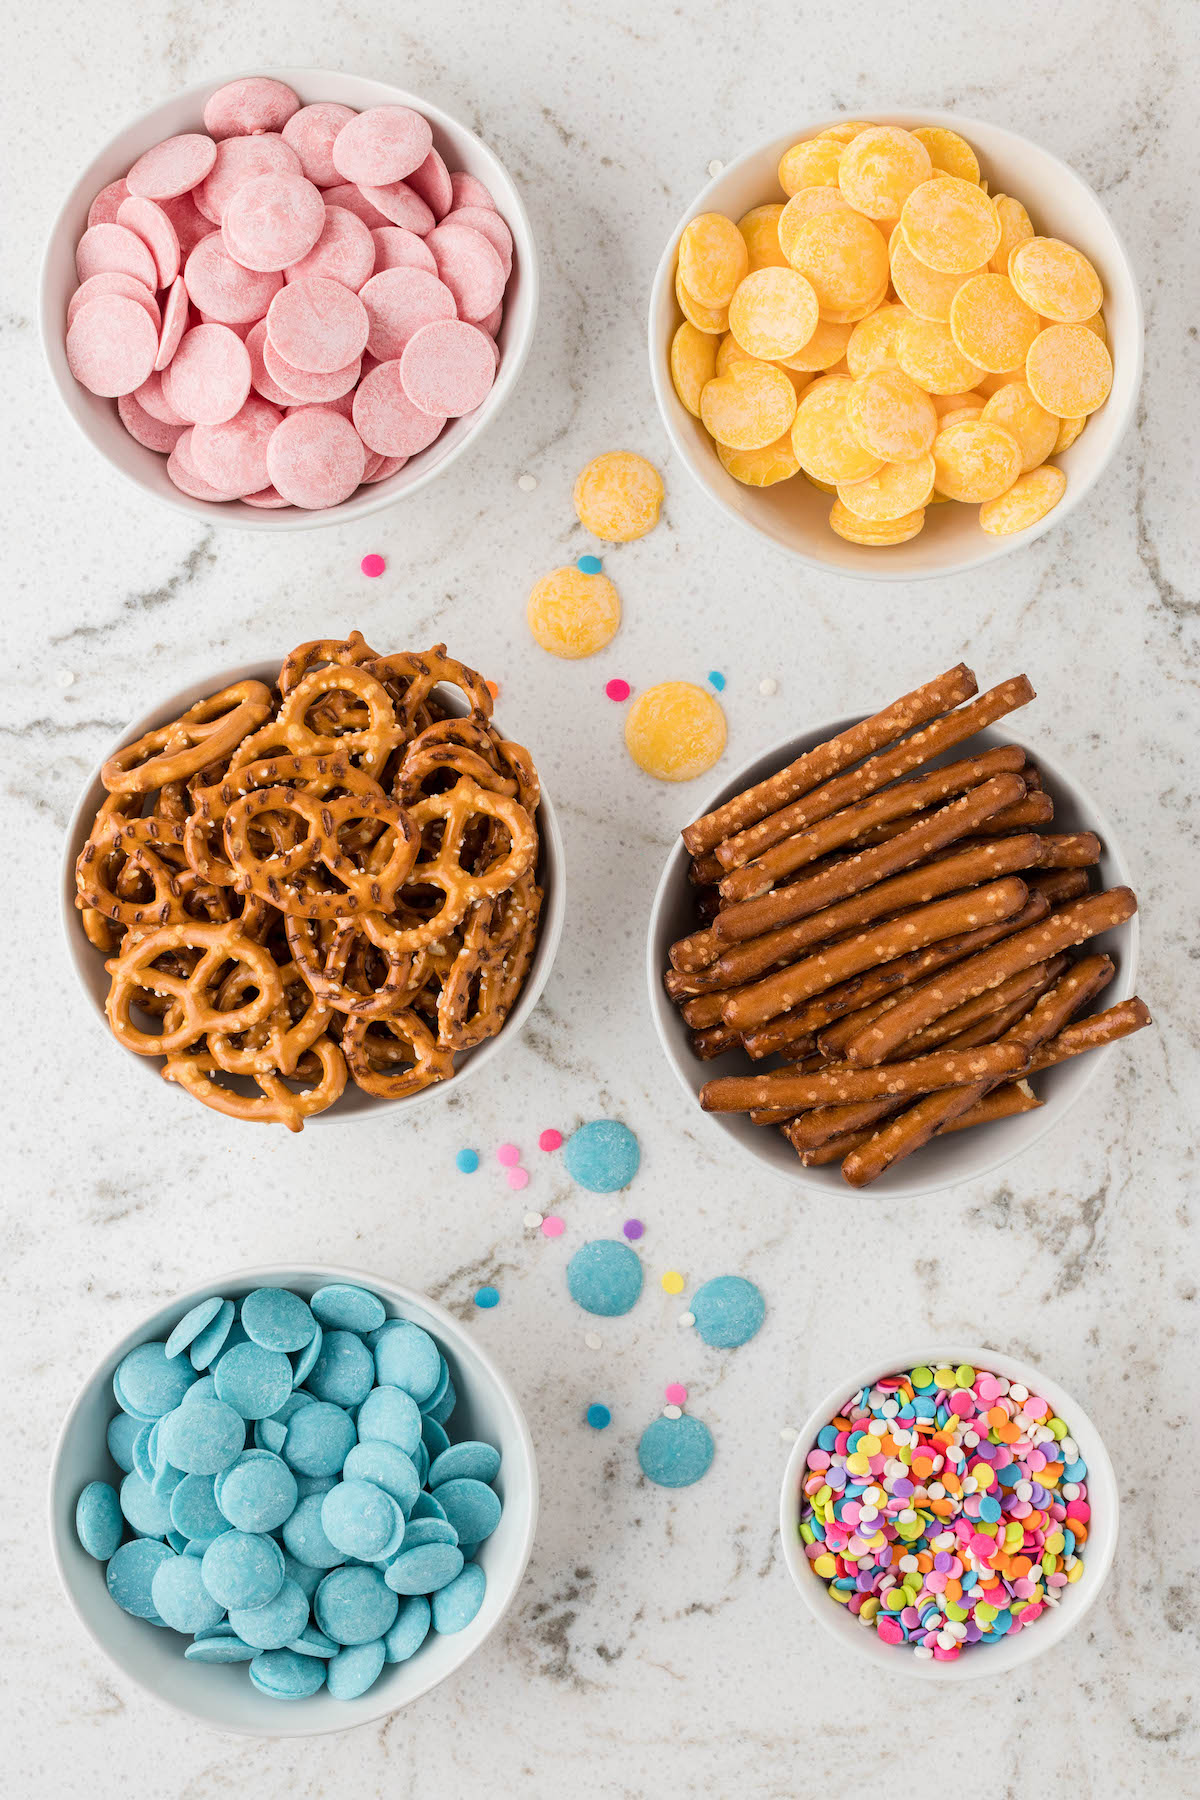 ingredients set out in bowls to make pastel chocolate butterfly pretzels